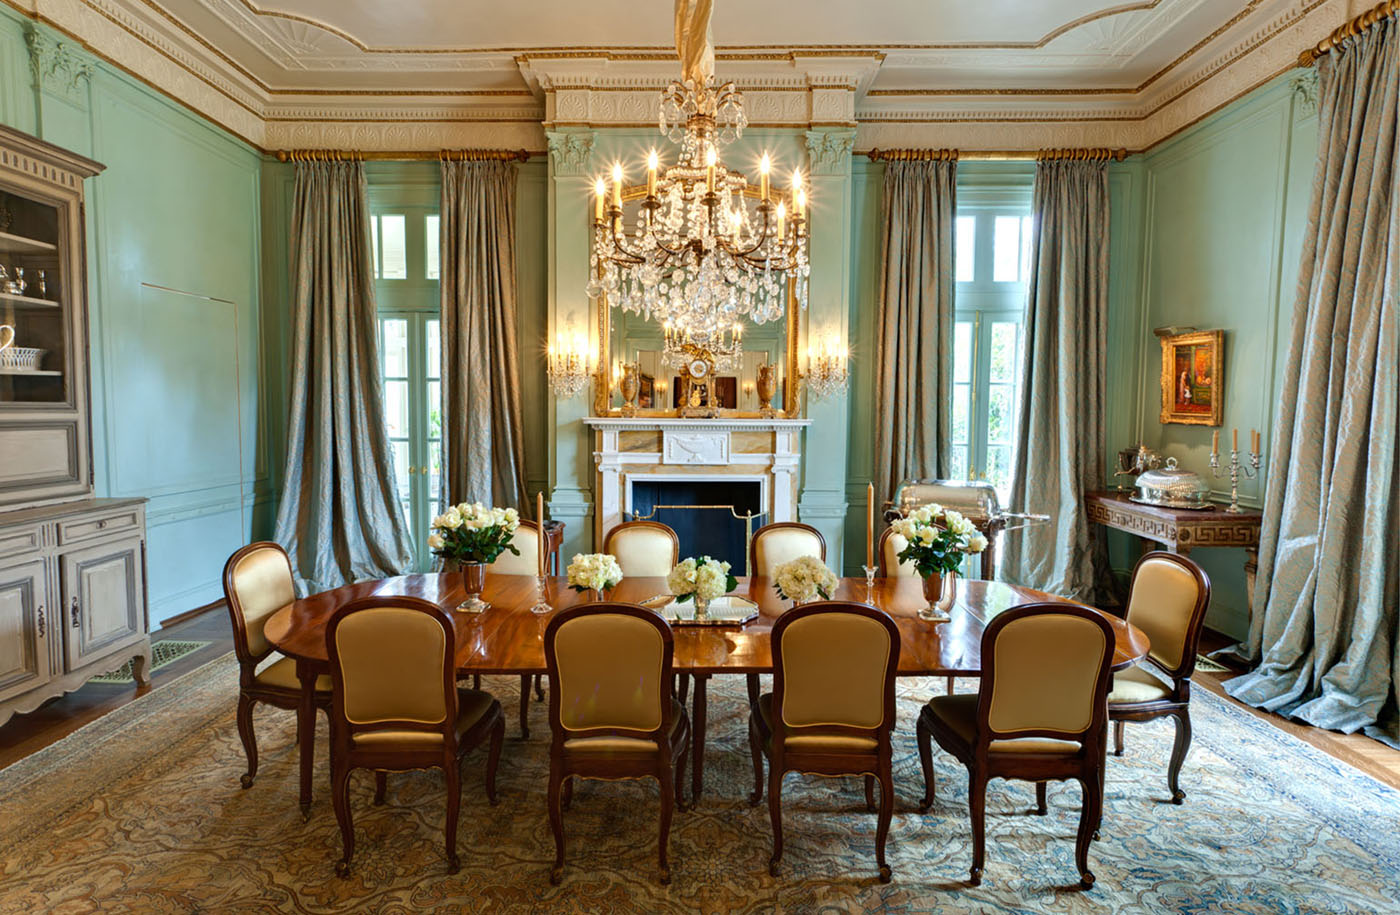 An elegant Robin's egg blue dining room with floor to ceiling taupe drapes, a crystal chandelier an antique rug in muted colors featuring an oriental rug pattern